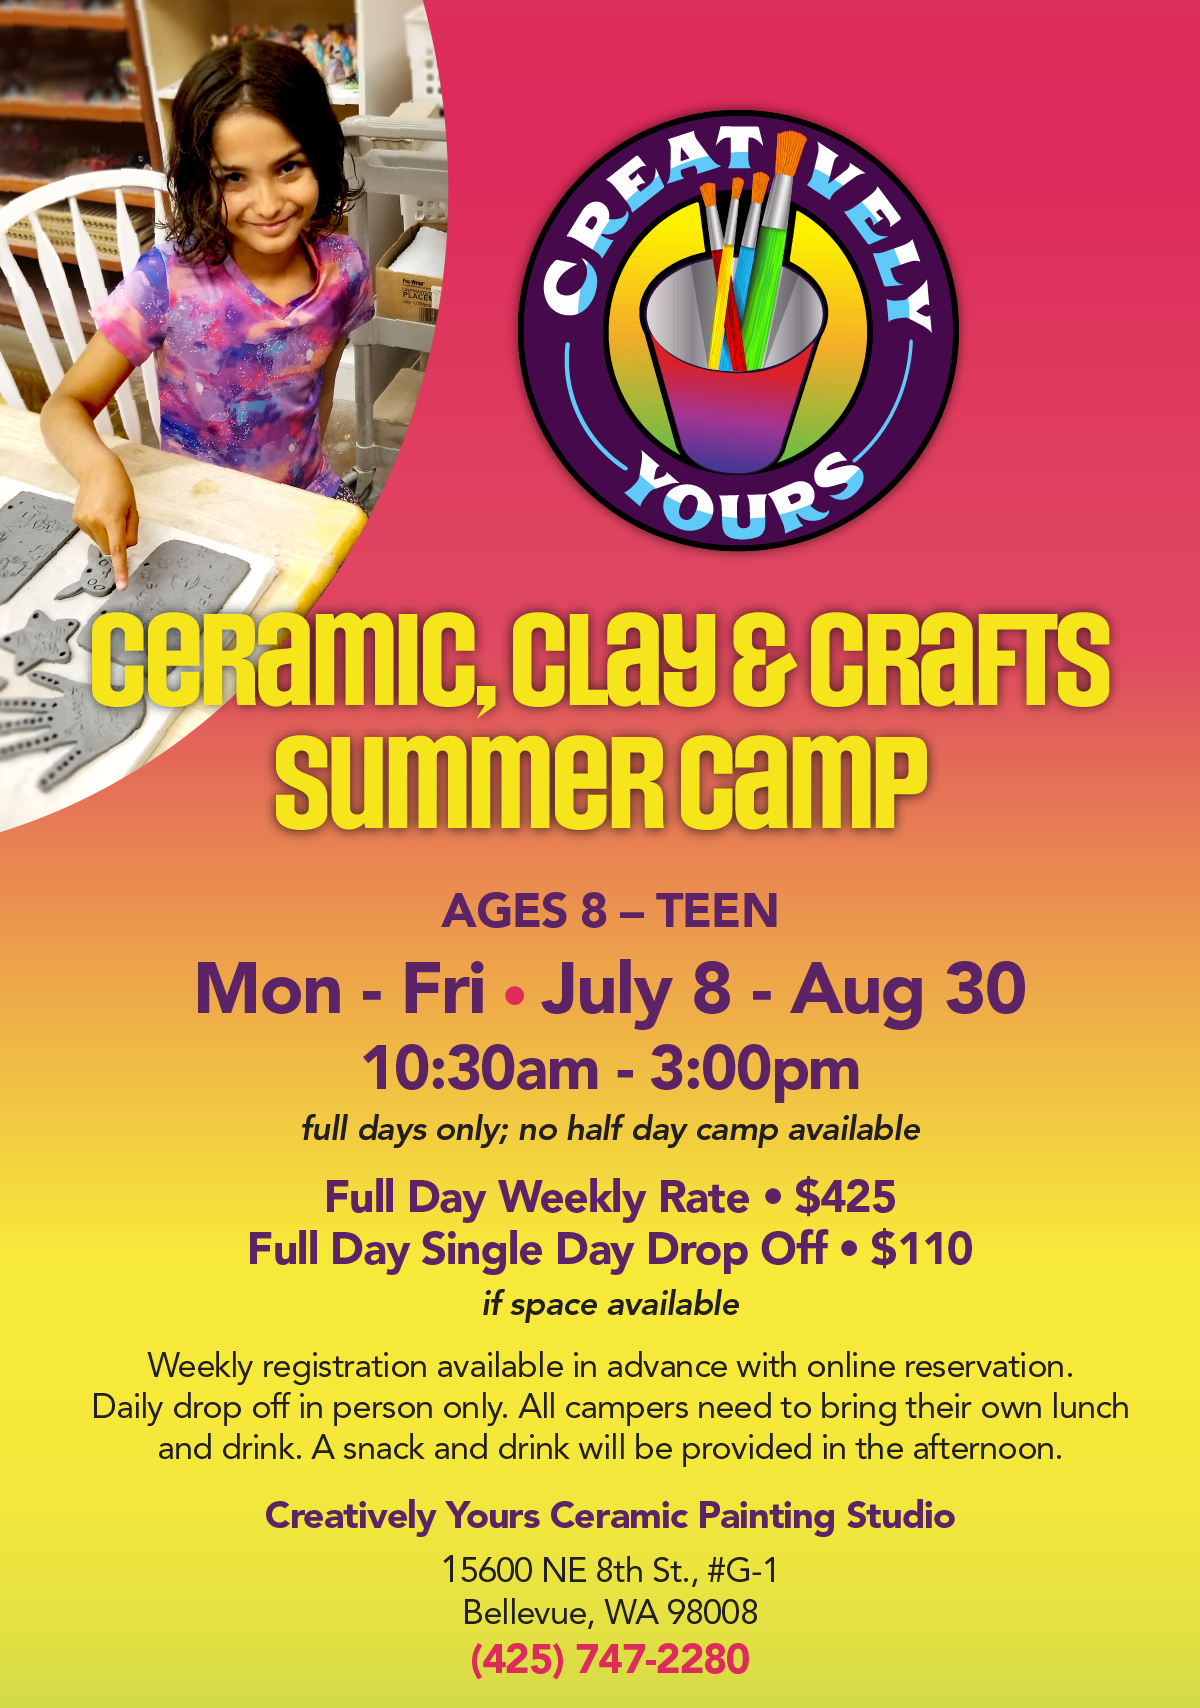 Creatively-Yours-Summer-Camp-website.png (1)